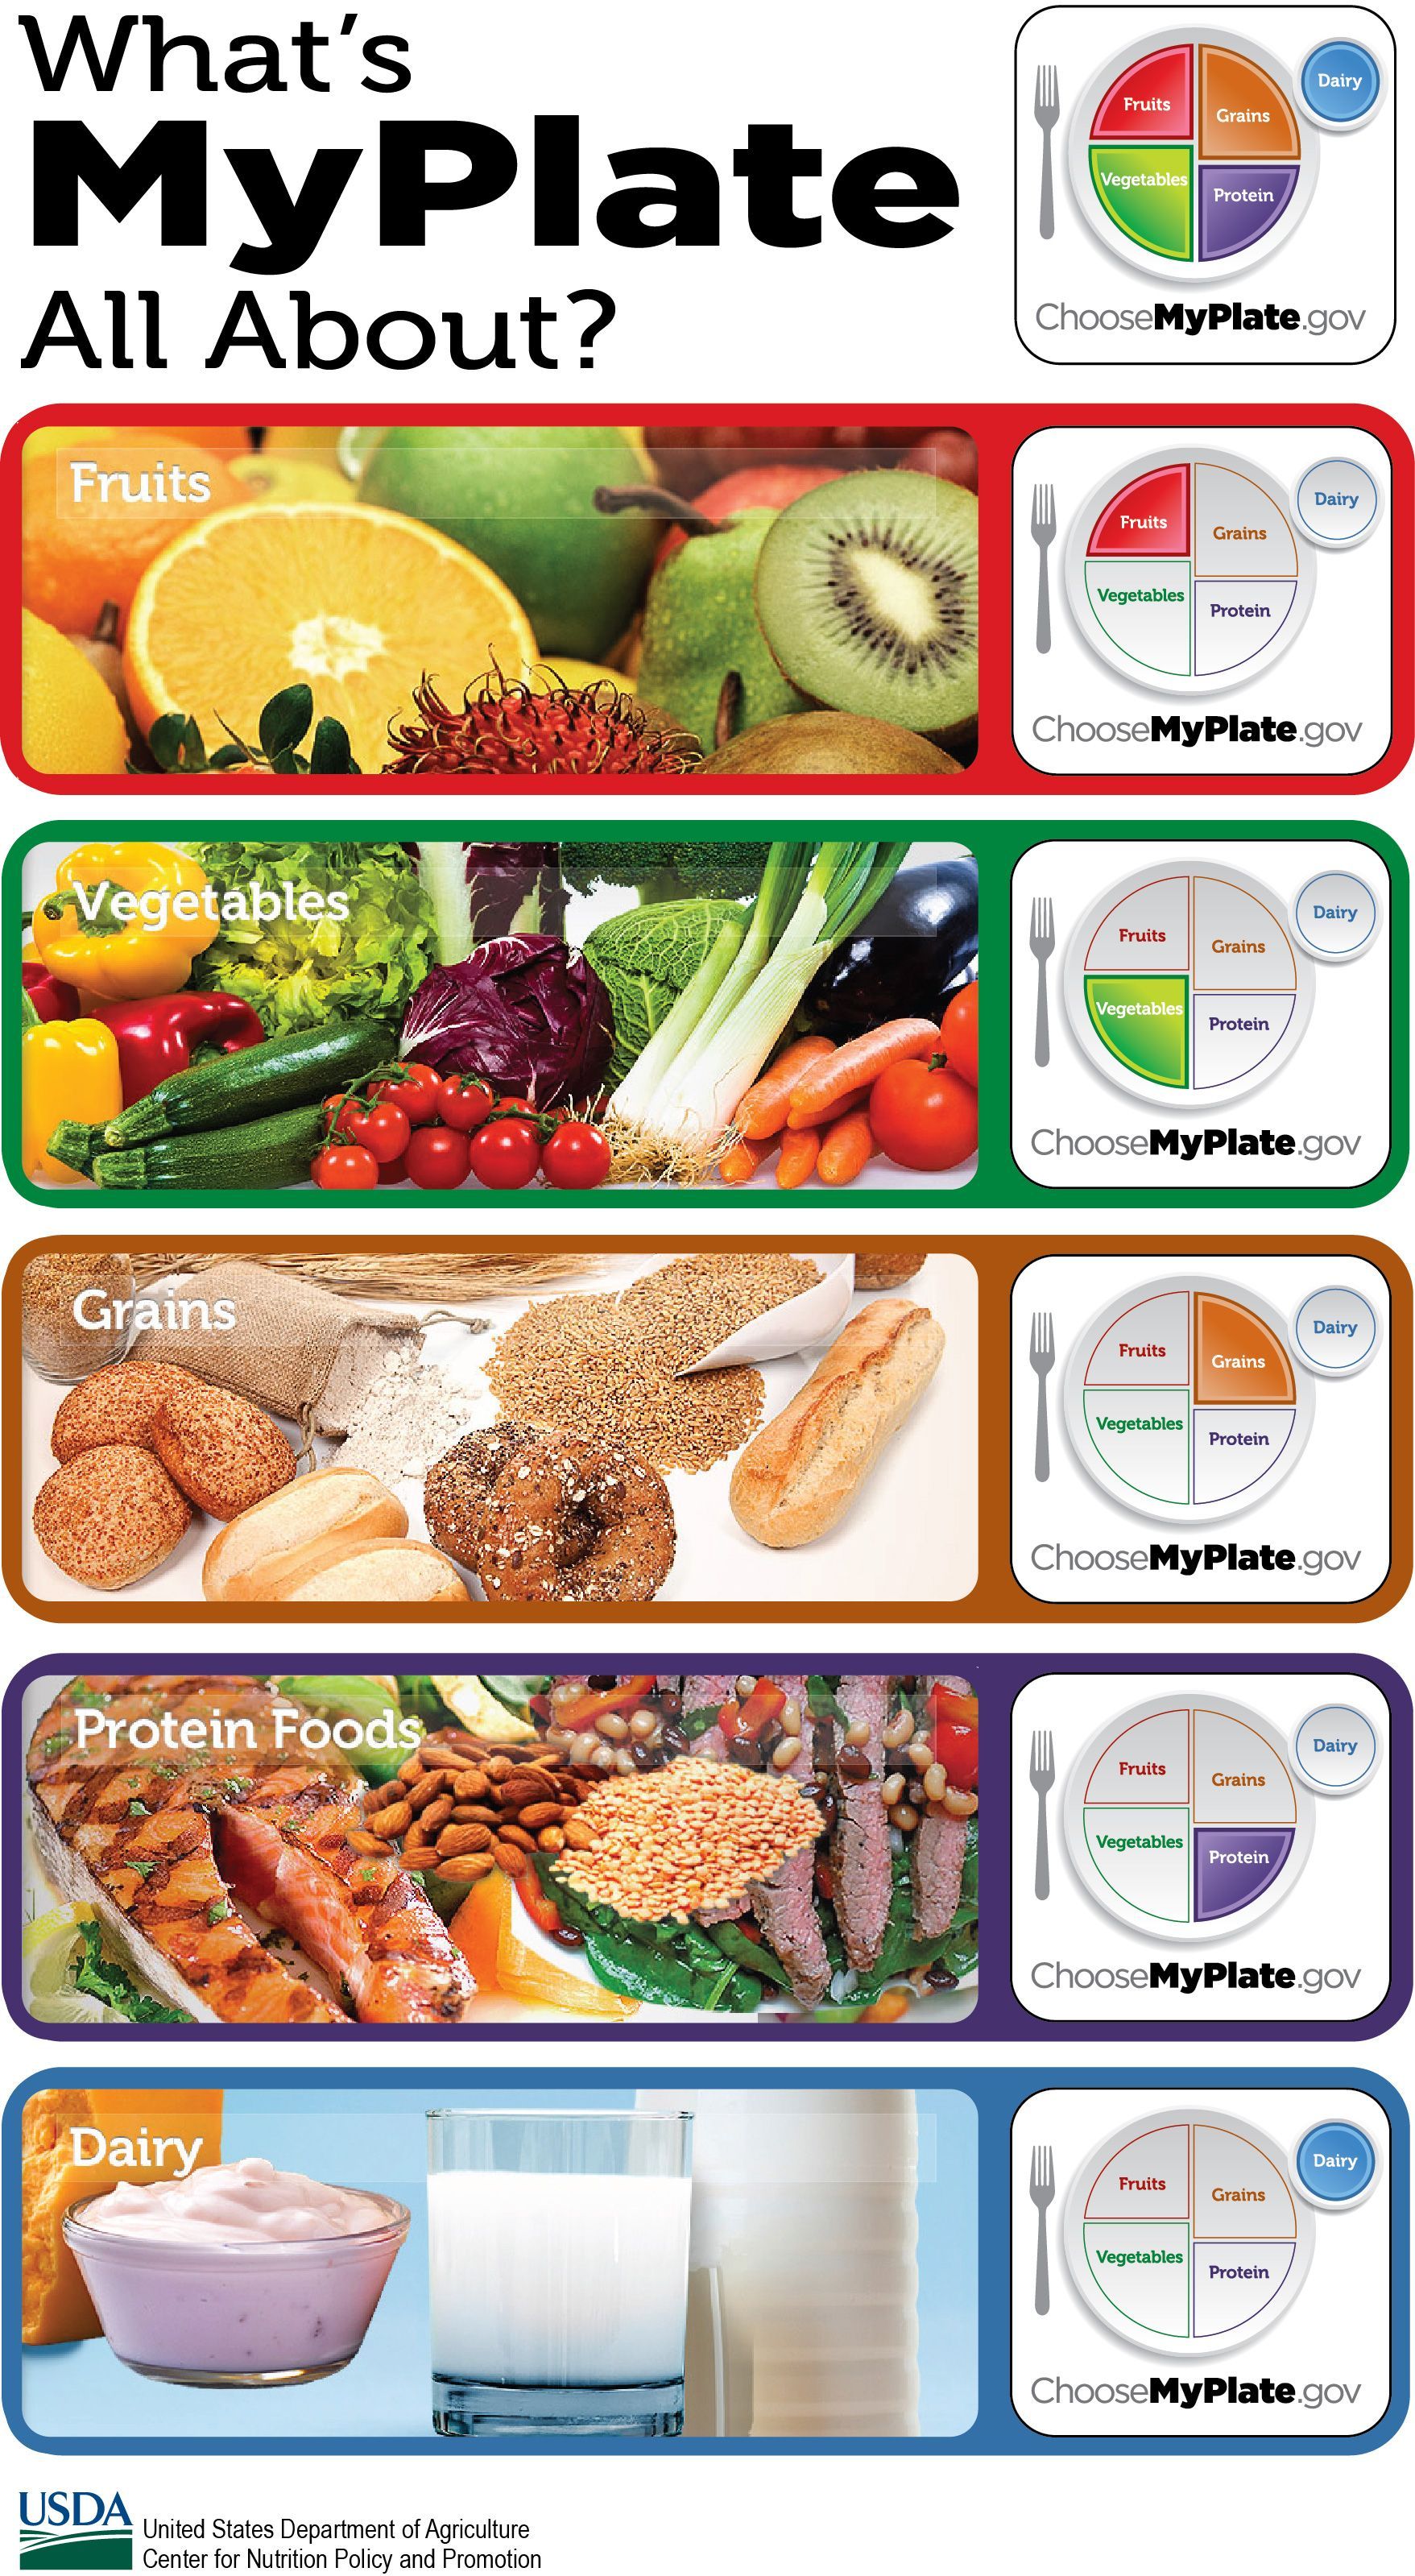 MyPlate teaches the 5 food groups: fruits, vegetables, grains, protein, and dairy.